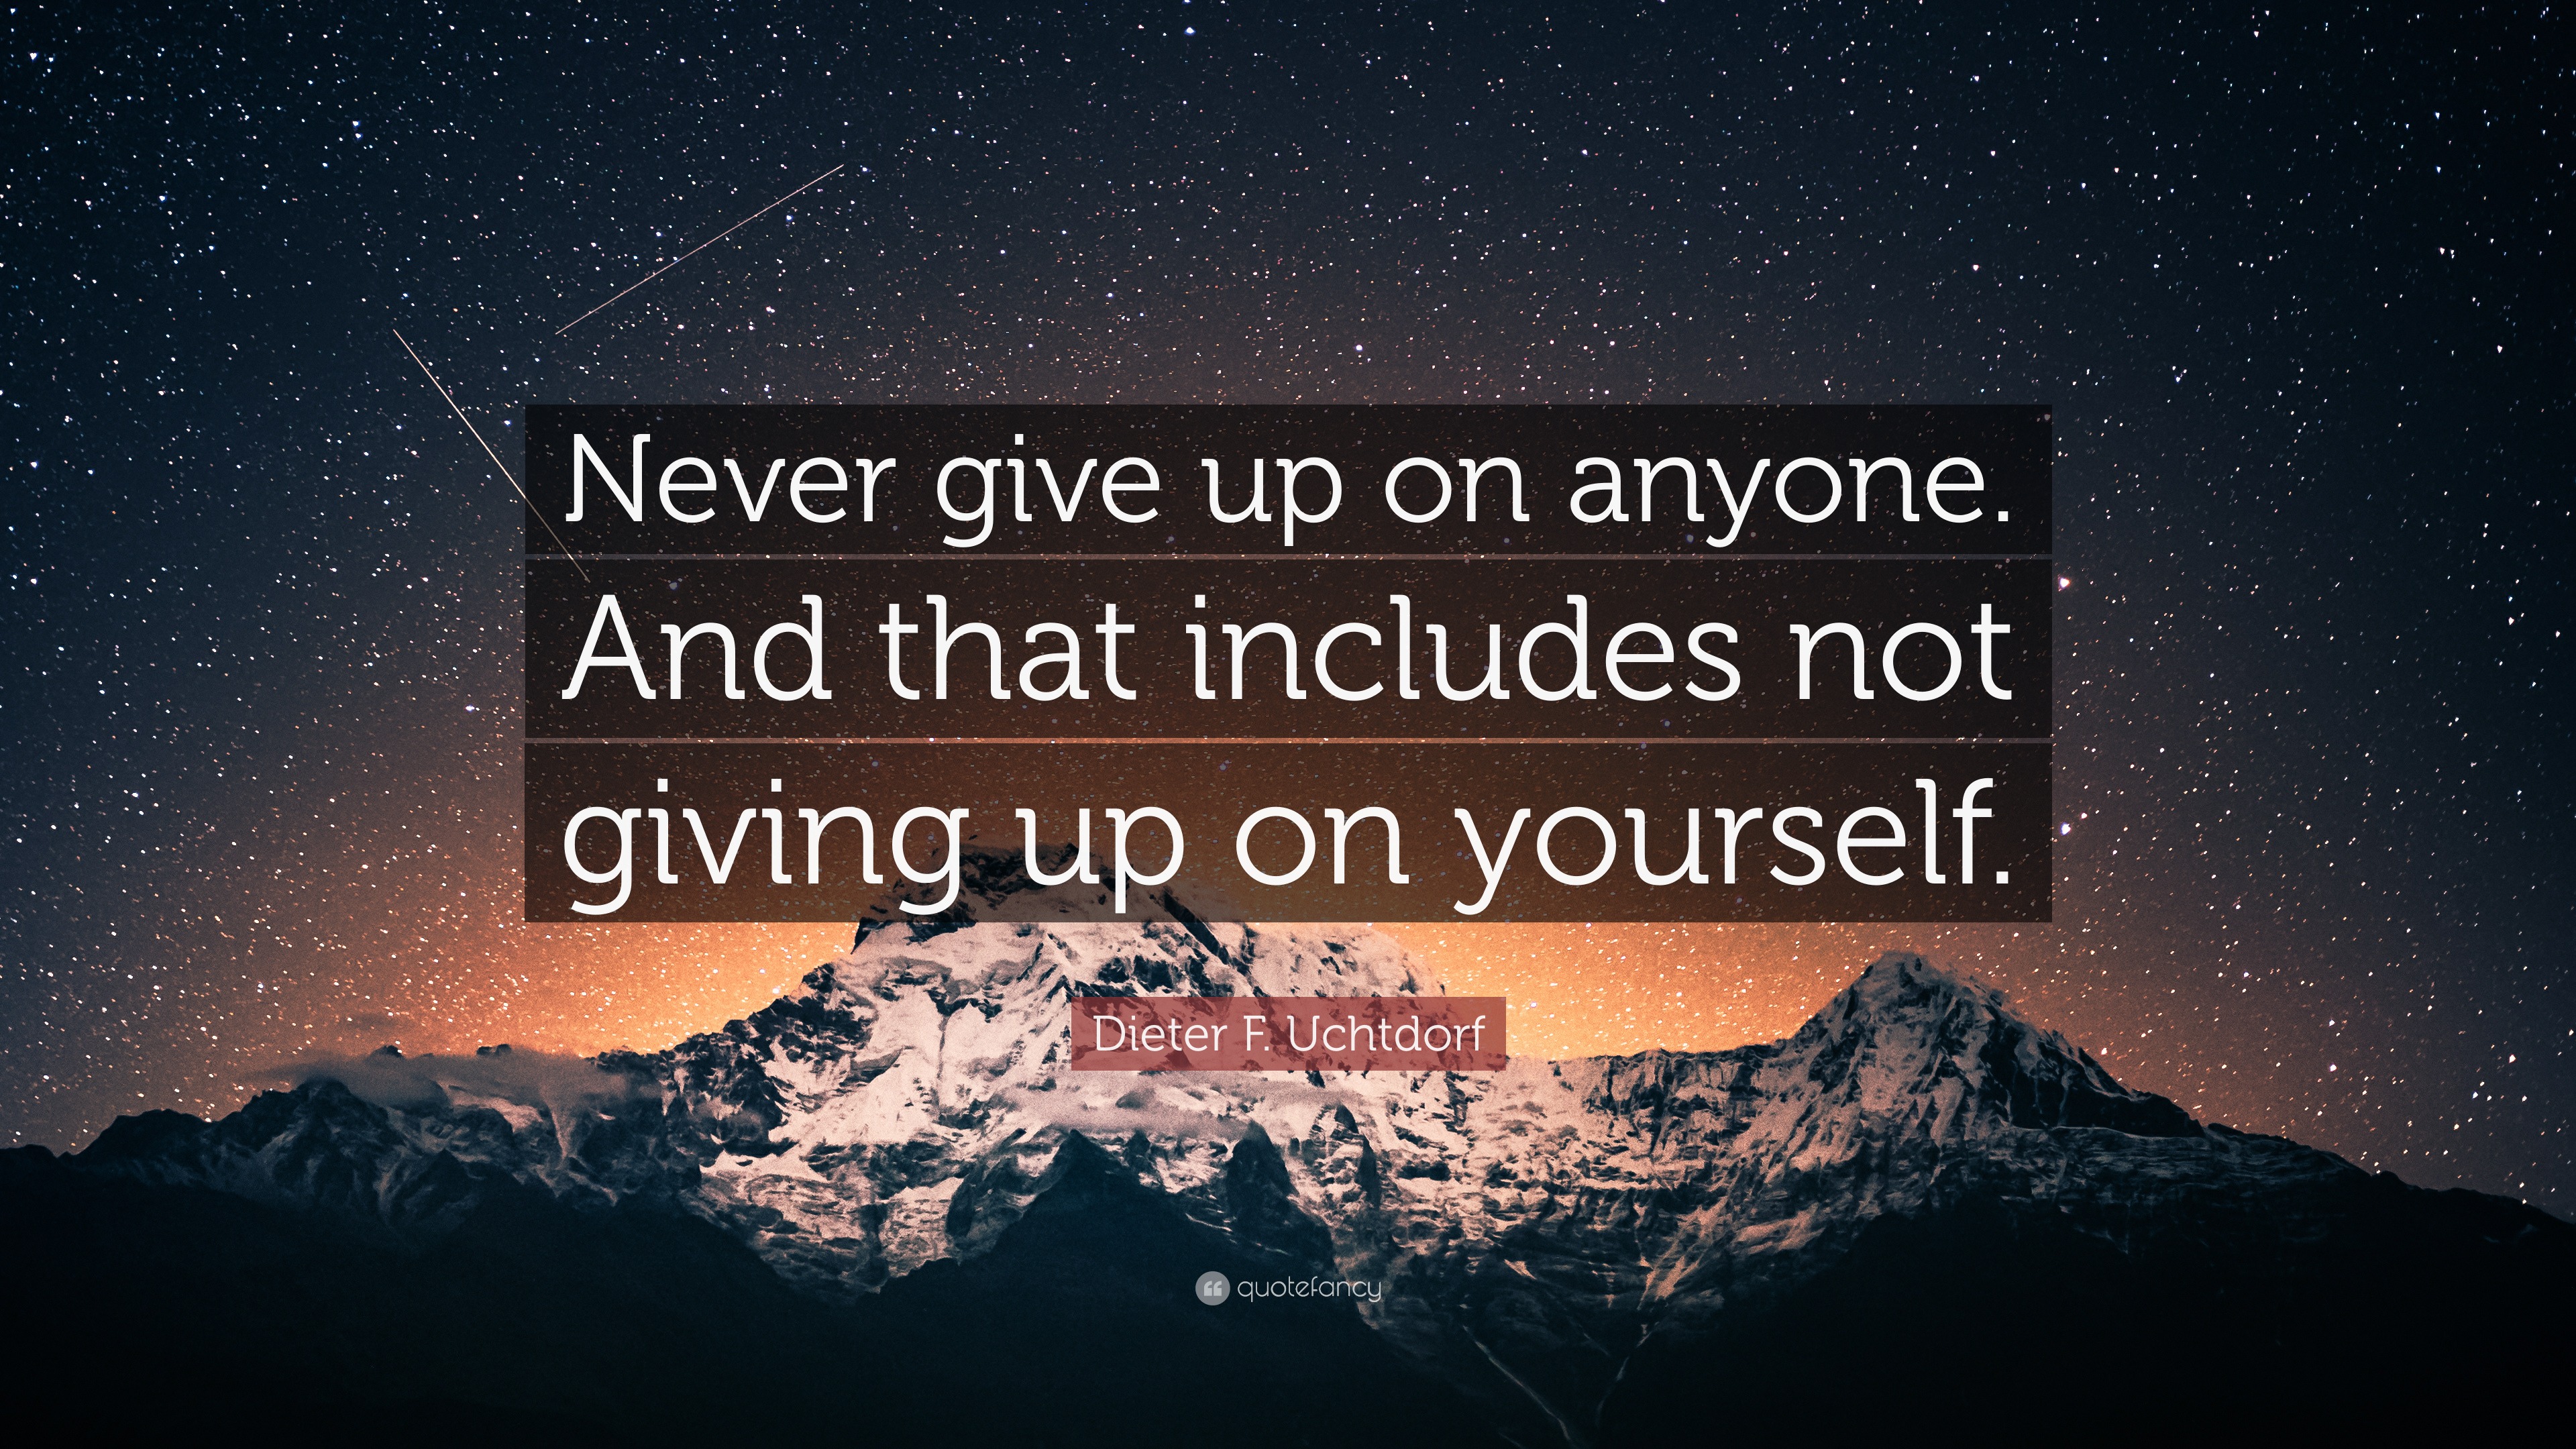 Dieter F. Uchtdorf Quote “Never give up on anyone. And